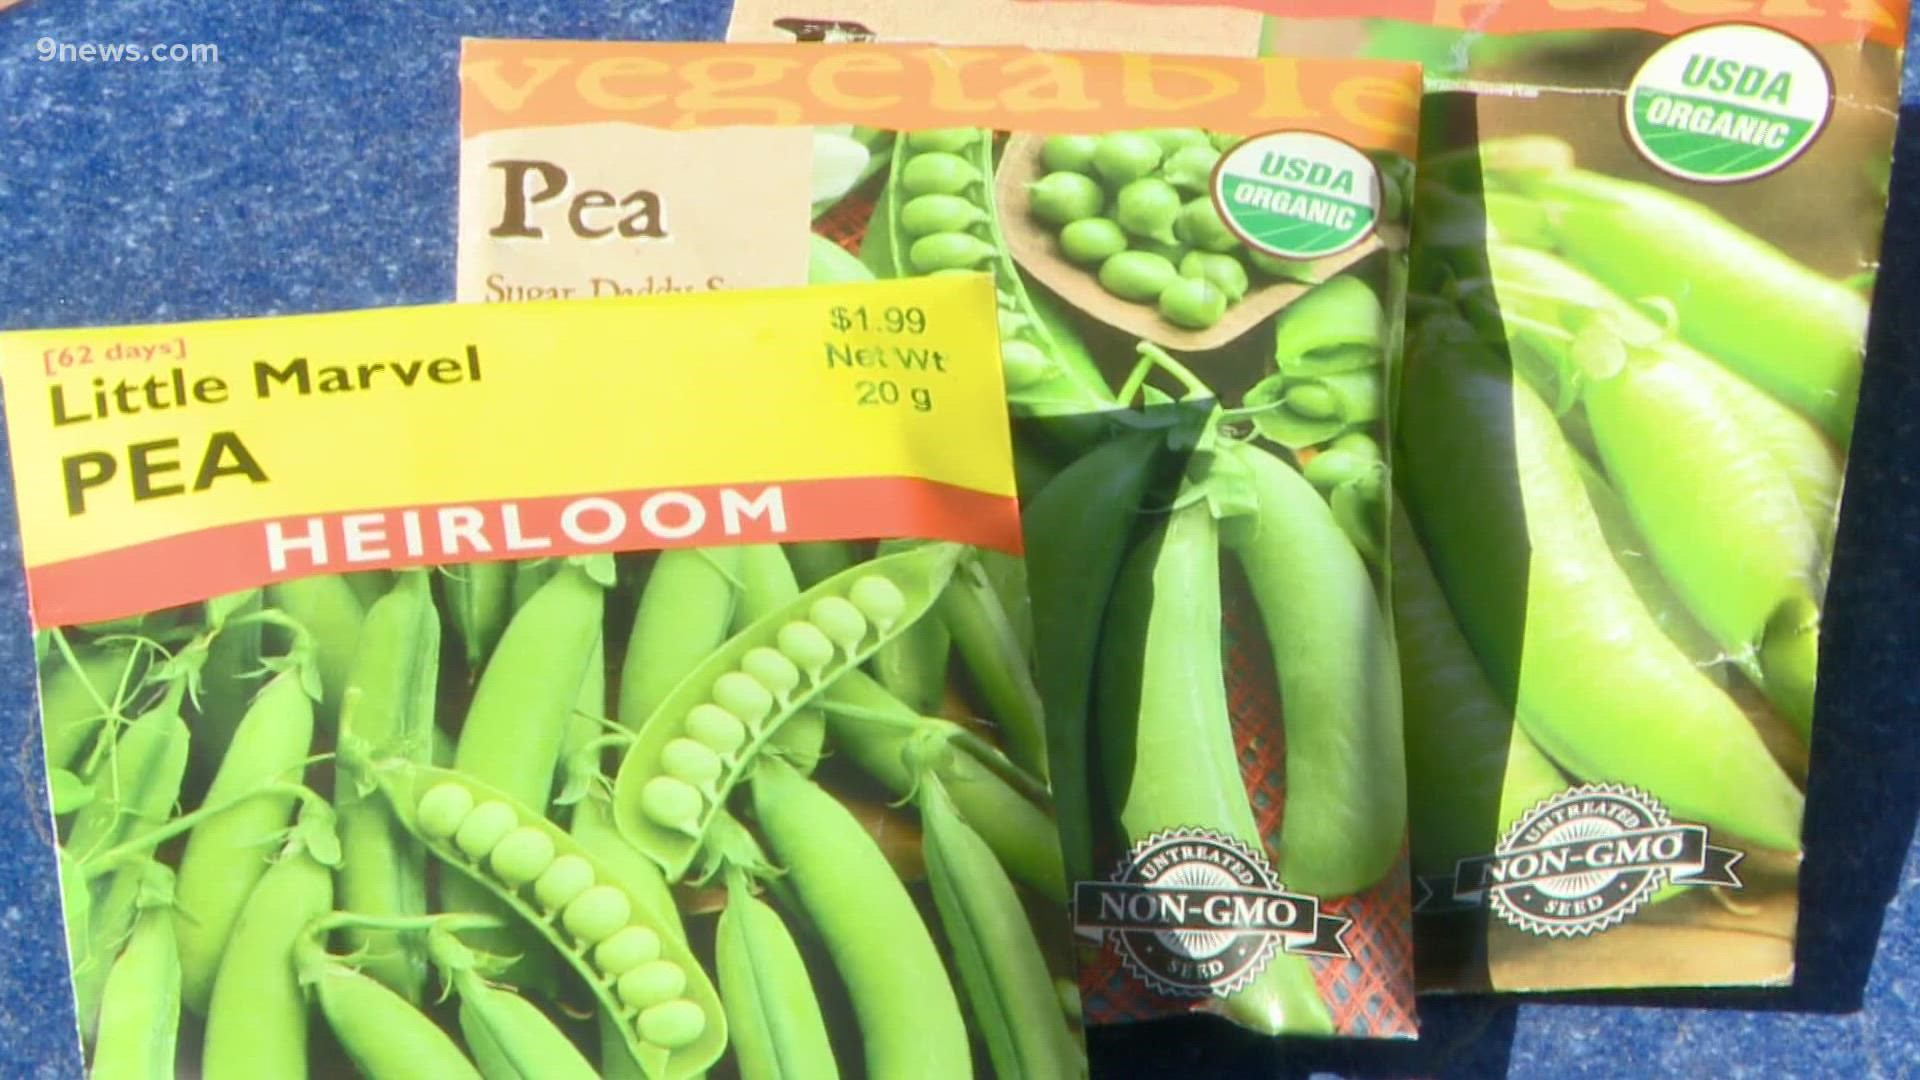 St. Patrick's Day has long been the traditional date to plant peas.